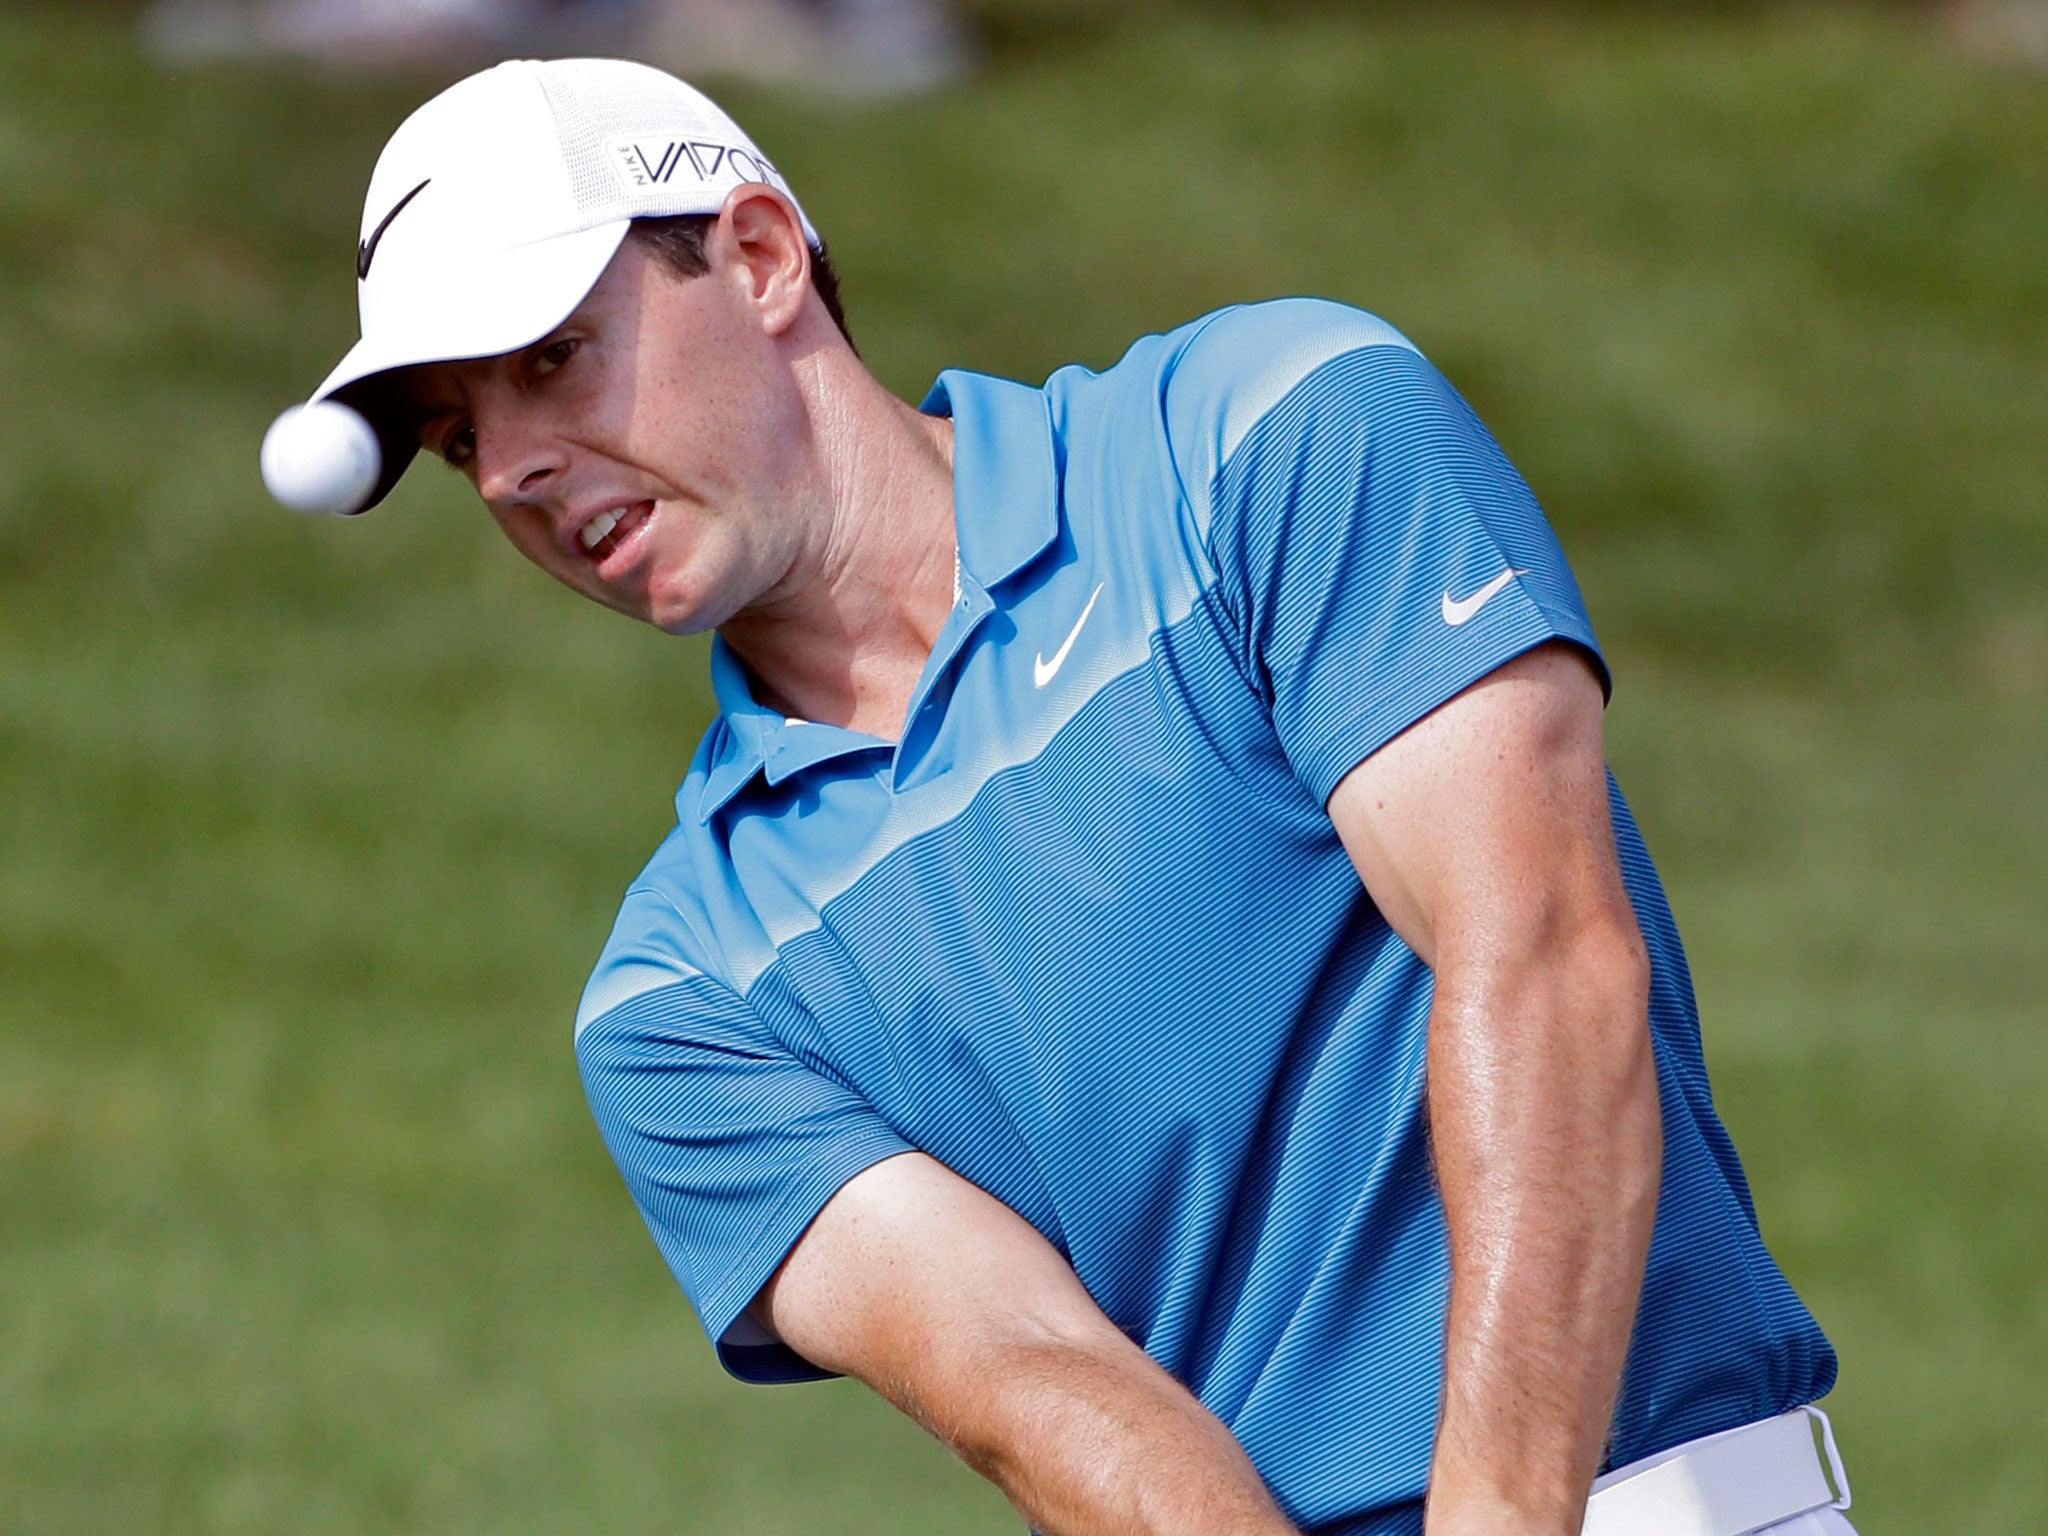 Rory McIlroy controlled news of his recovery on Twitter